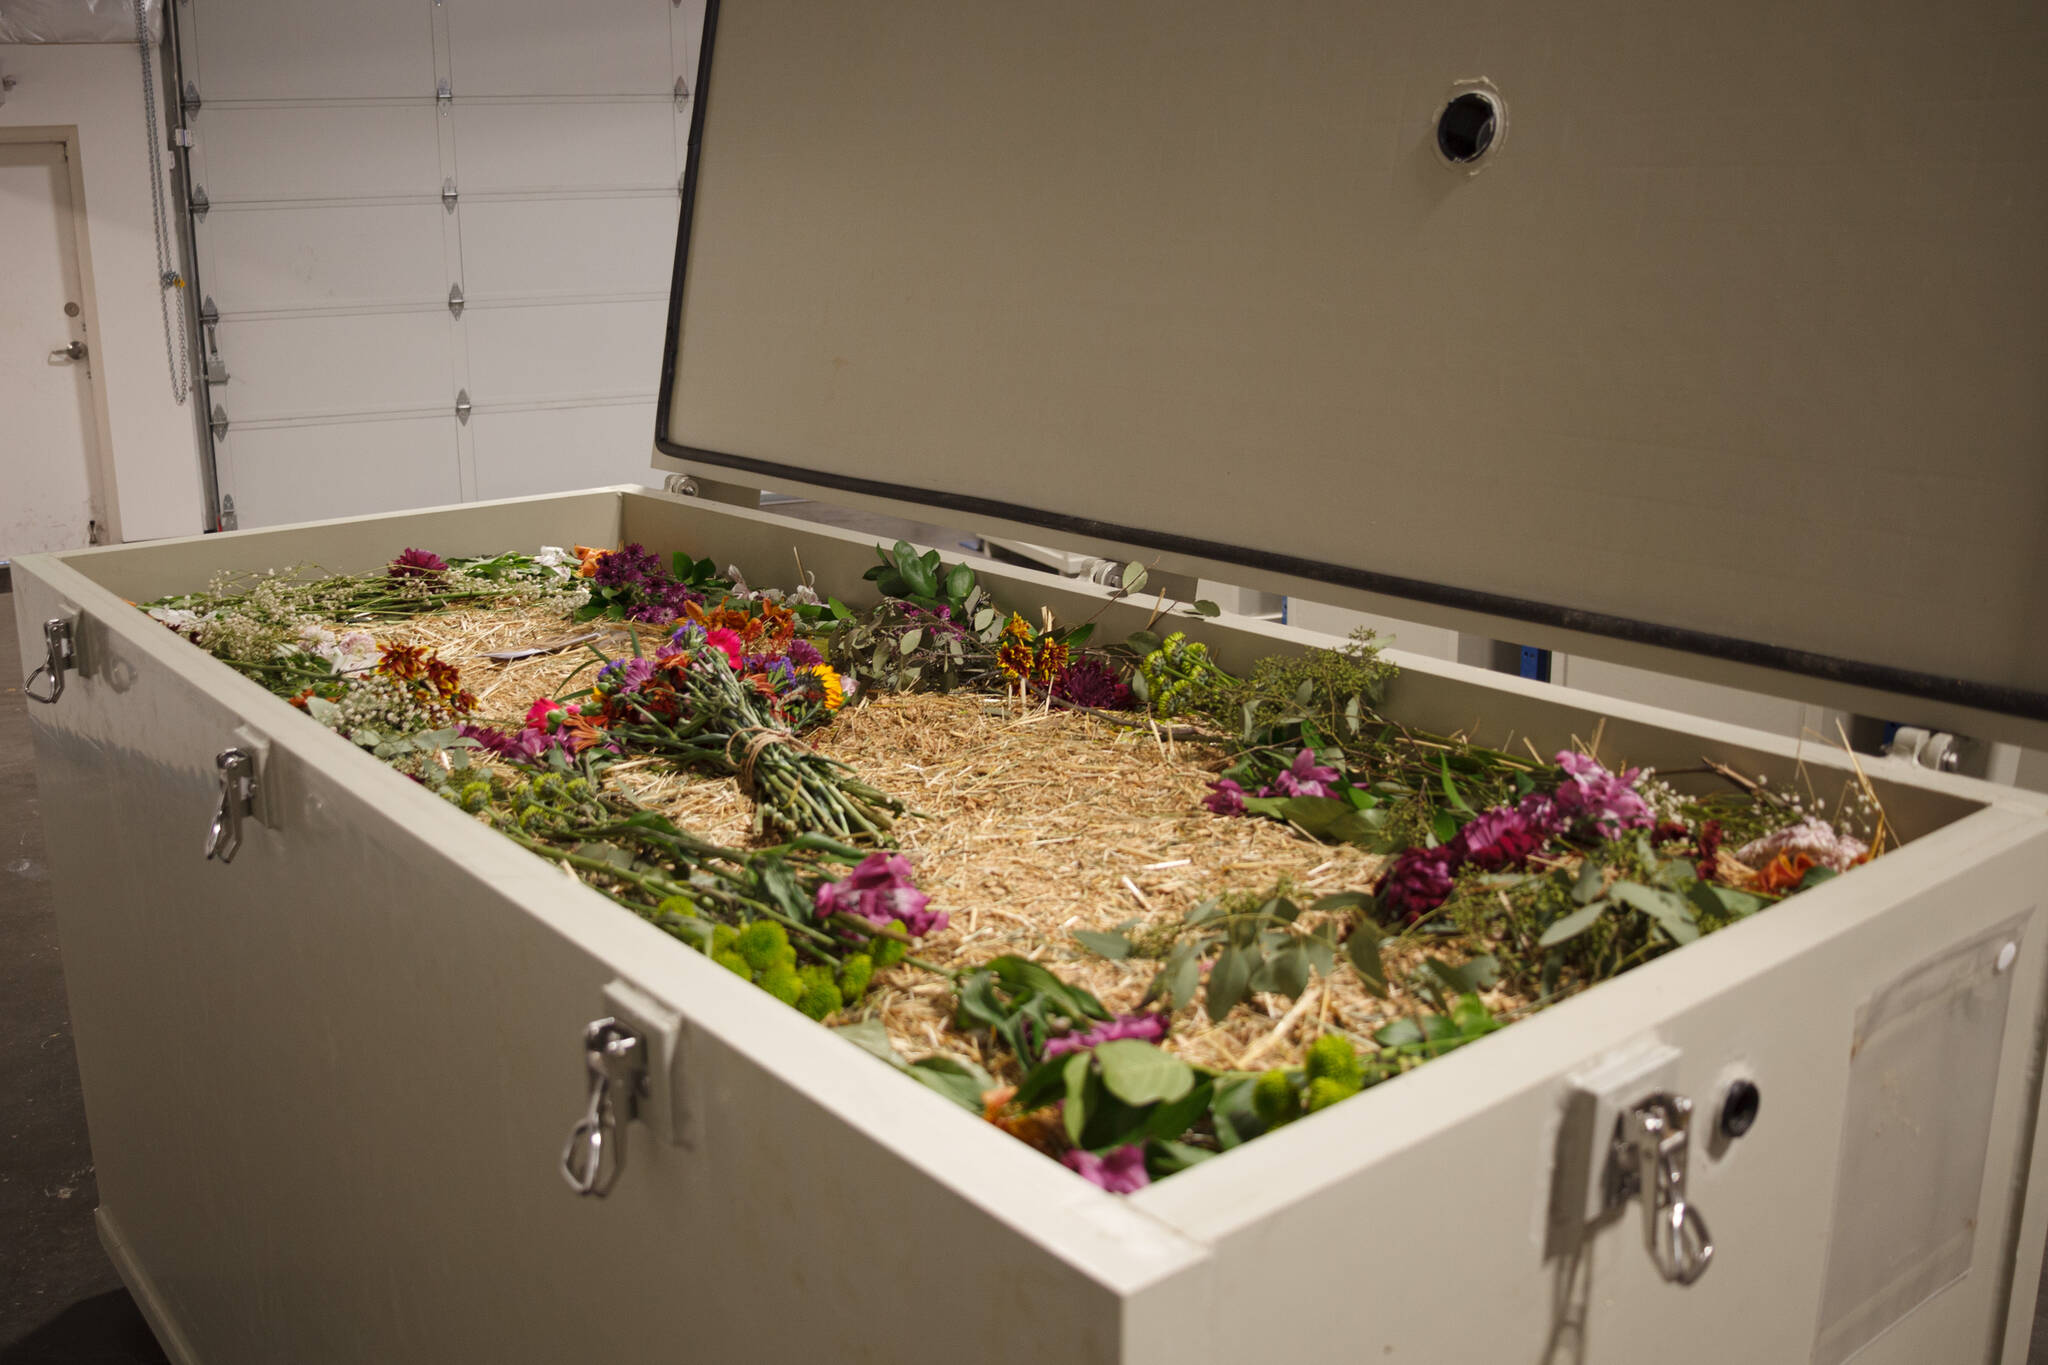 Photo by Henry Stewart-Wood/Sound Publishing
One of Return Home’s cells, filled entirely with organic material, demonstrates what the terramation cells look like. Return Home is one of the few terramation companies in the world. They transform people into soil.